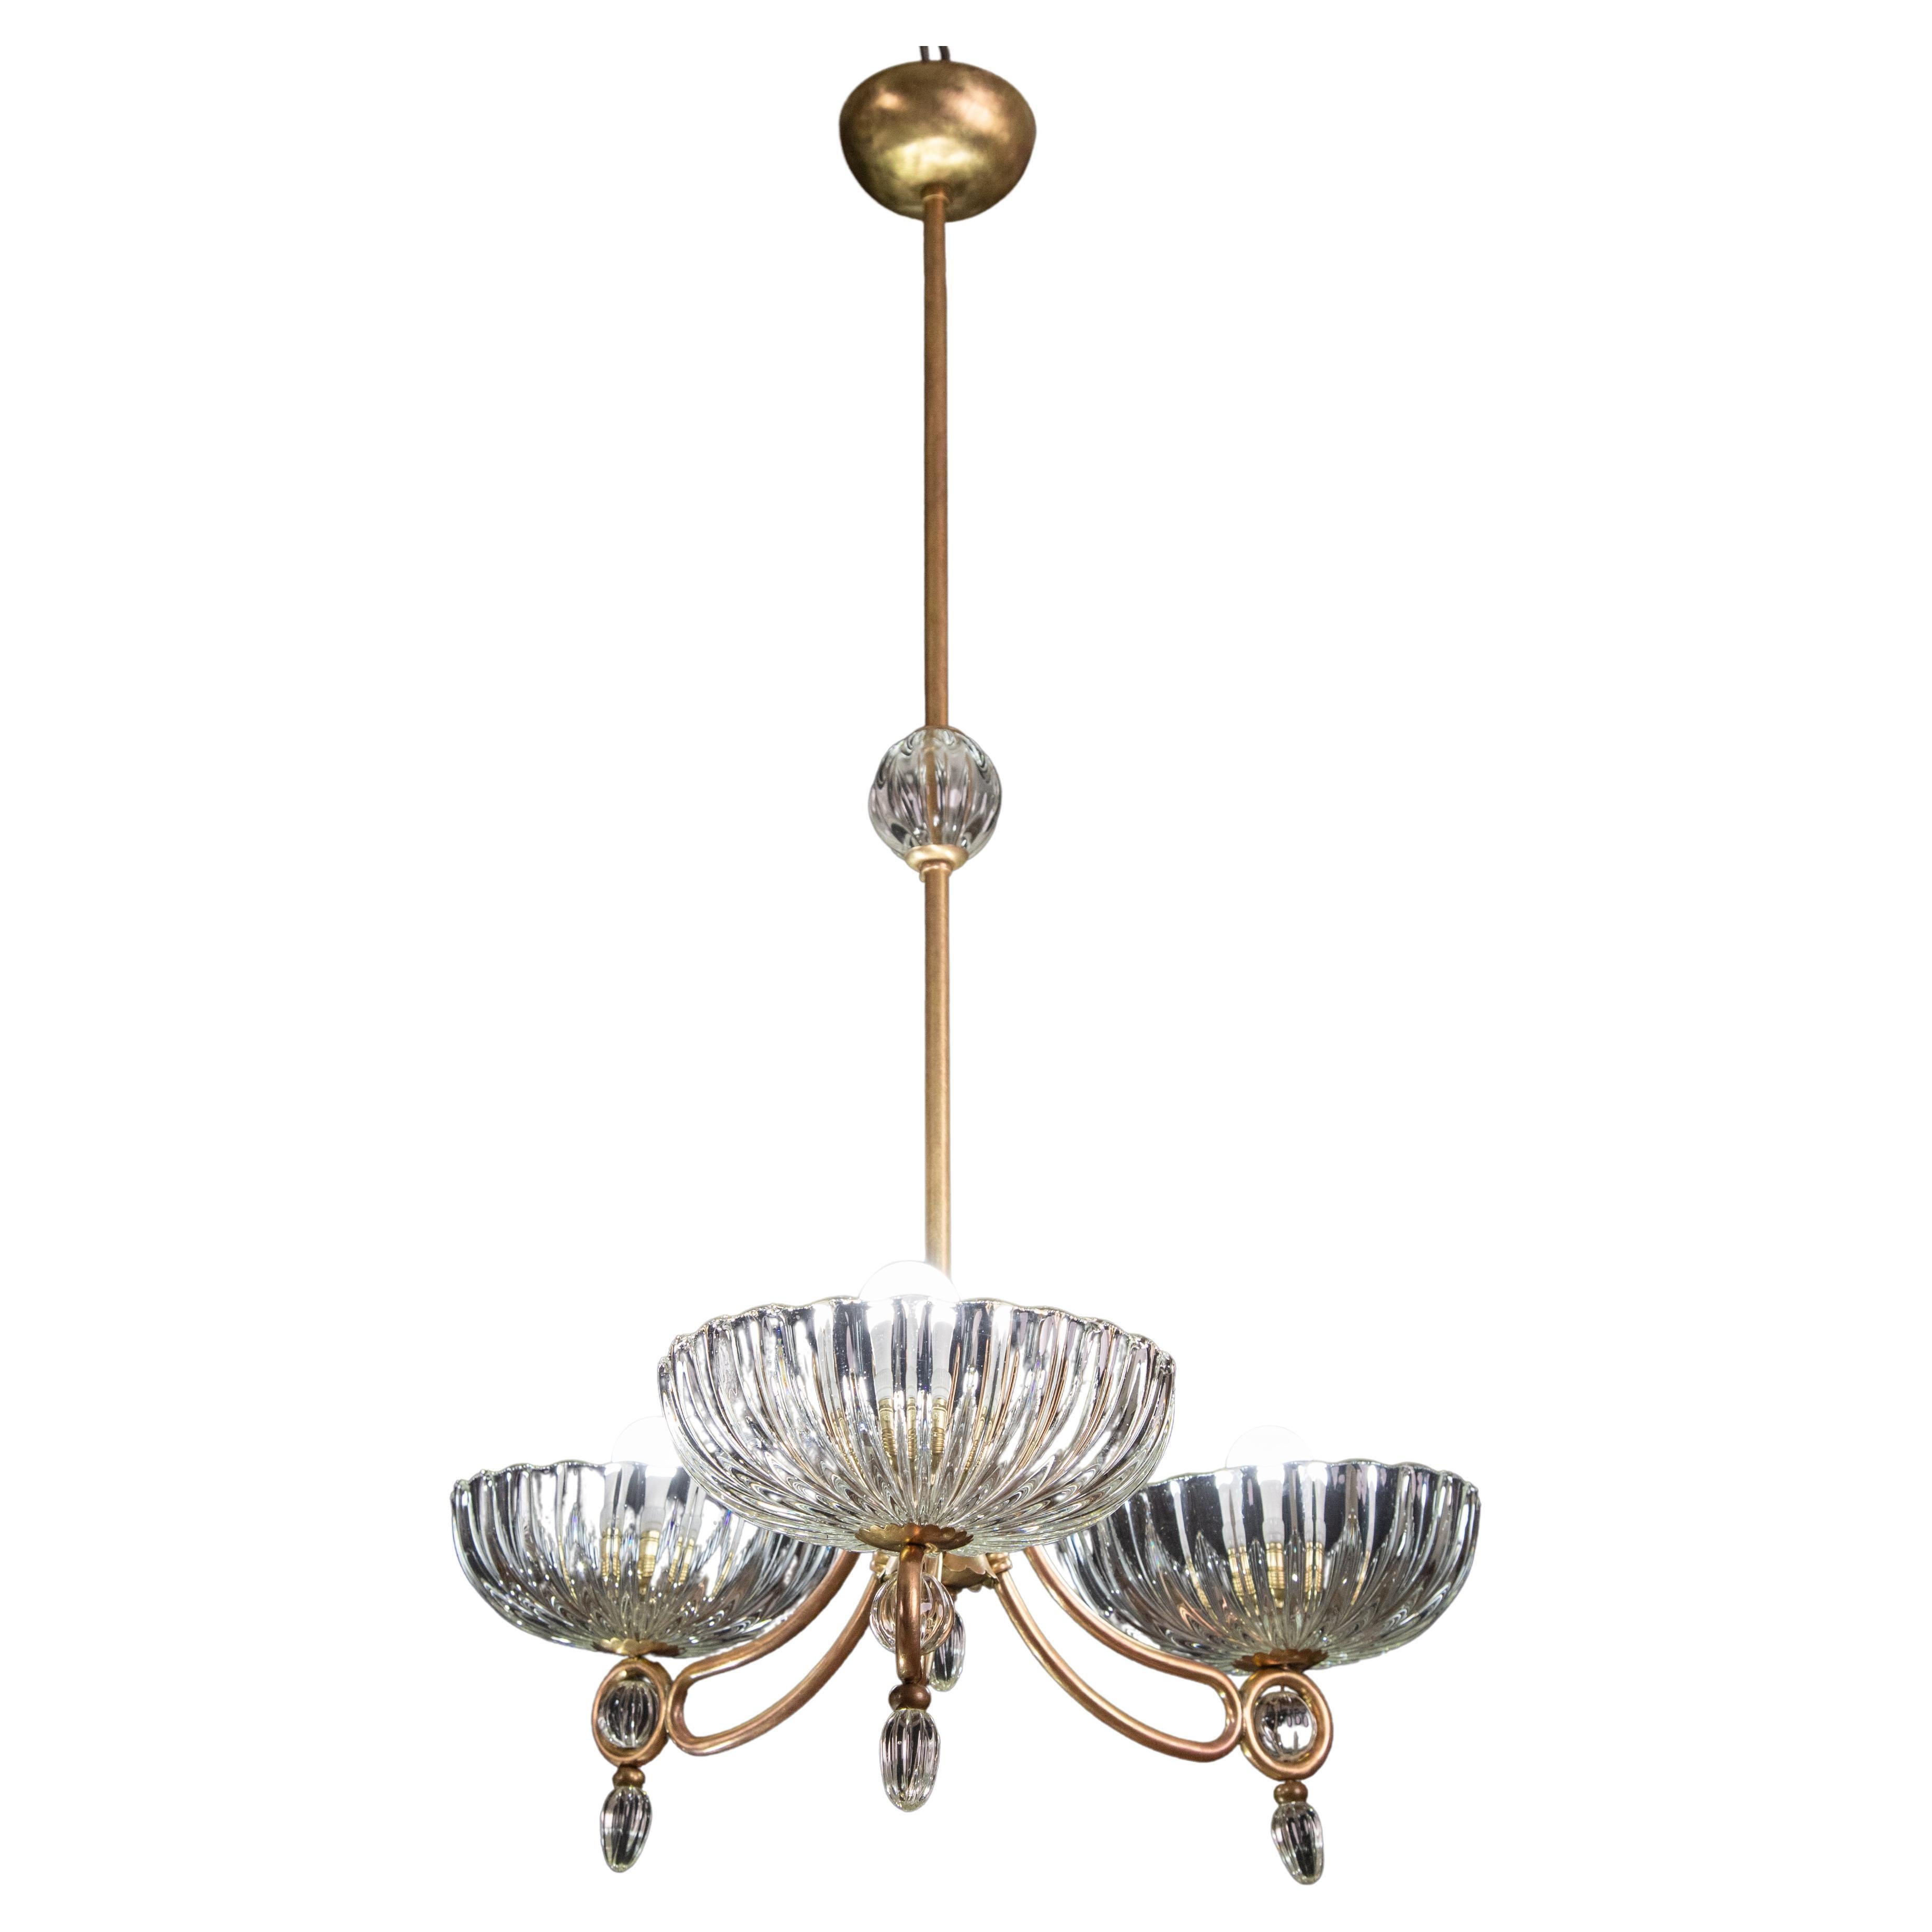 Splendid Art Deco chandelier attribuited to Ercole Barovier made by the glassworks Barovier & Toso in the 1940s-1950s.
The chandelier is 110 cm high and measures 60 cm wide.
It mounts tree E27 lights.
The glass elements make this tree-cup pendant